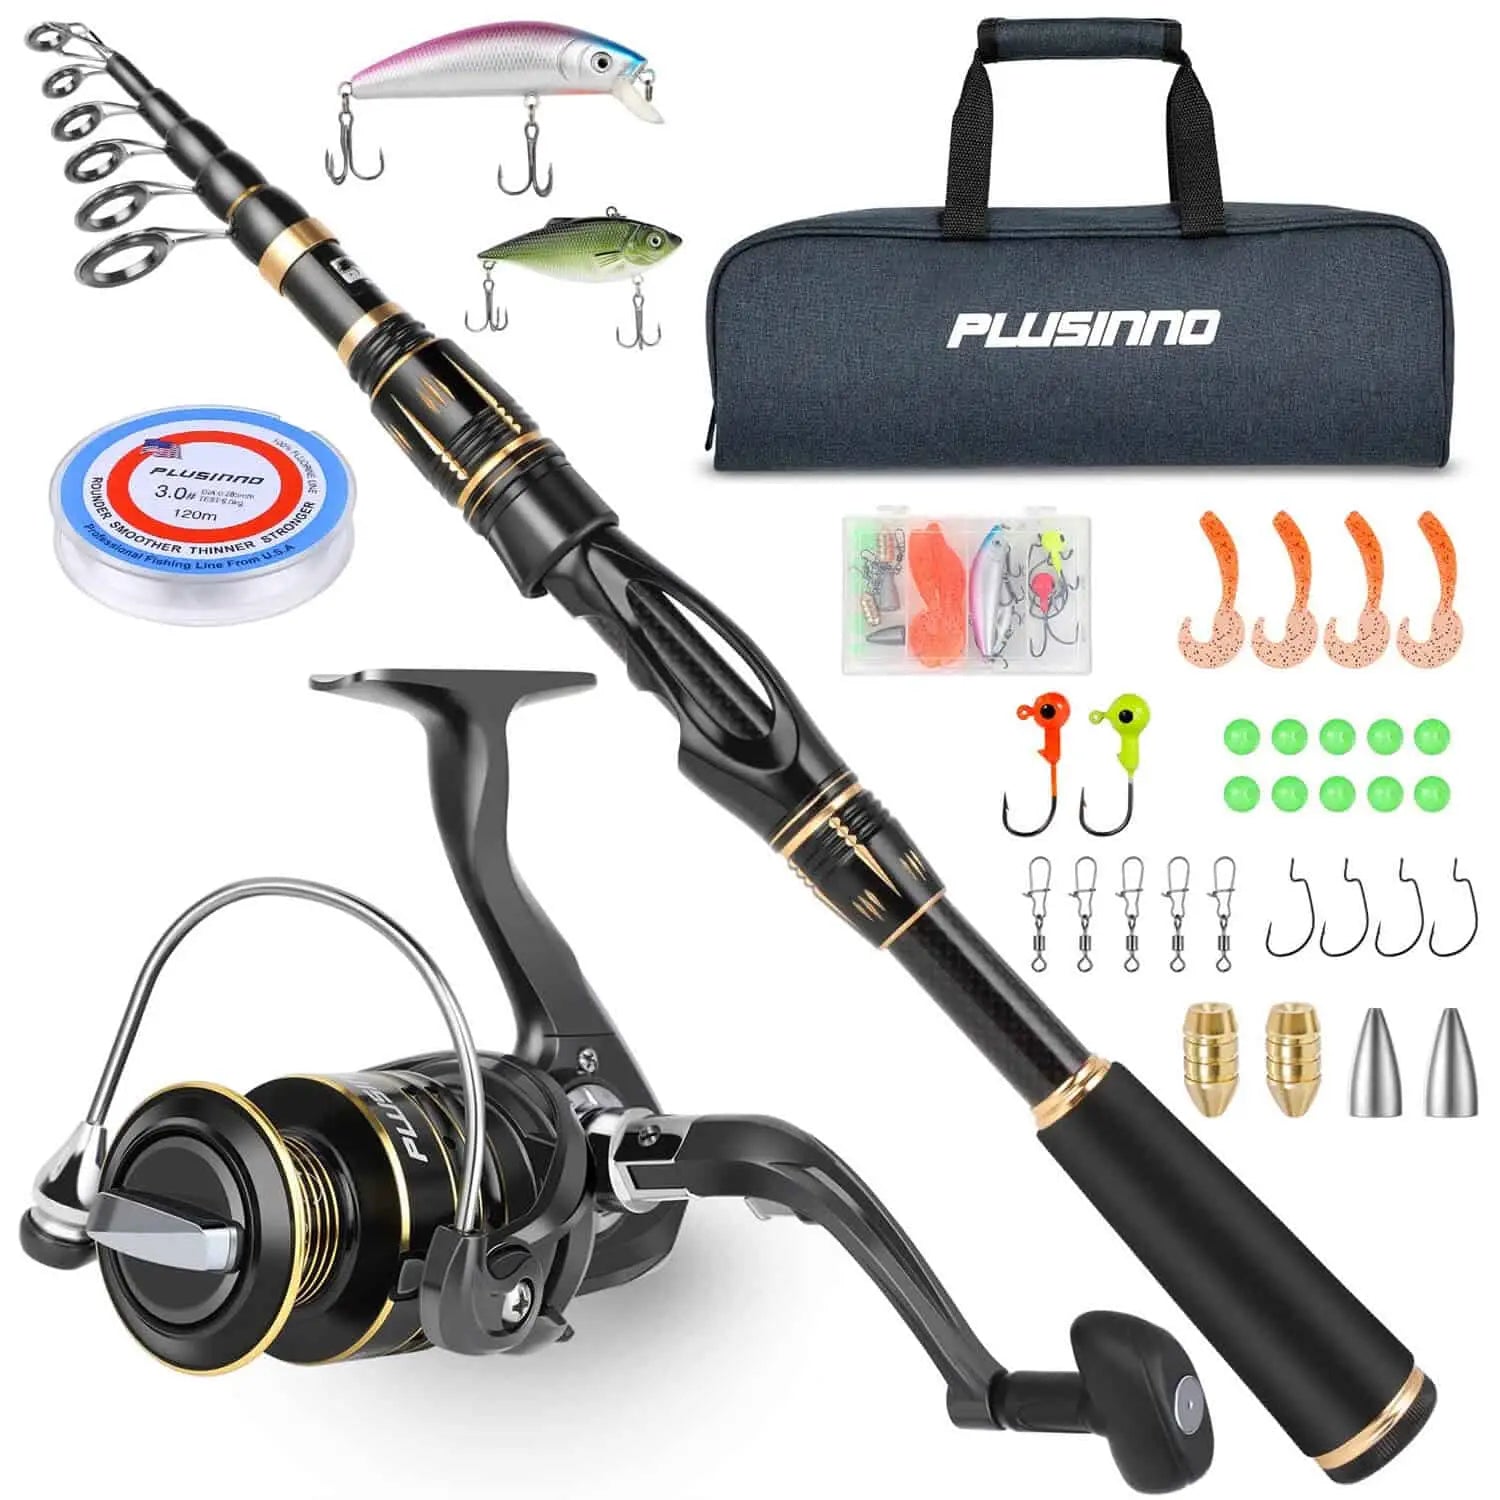 PLUSINNO Eagle Hunting X Fishing Rod and Reel Combo with Carrier